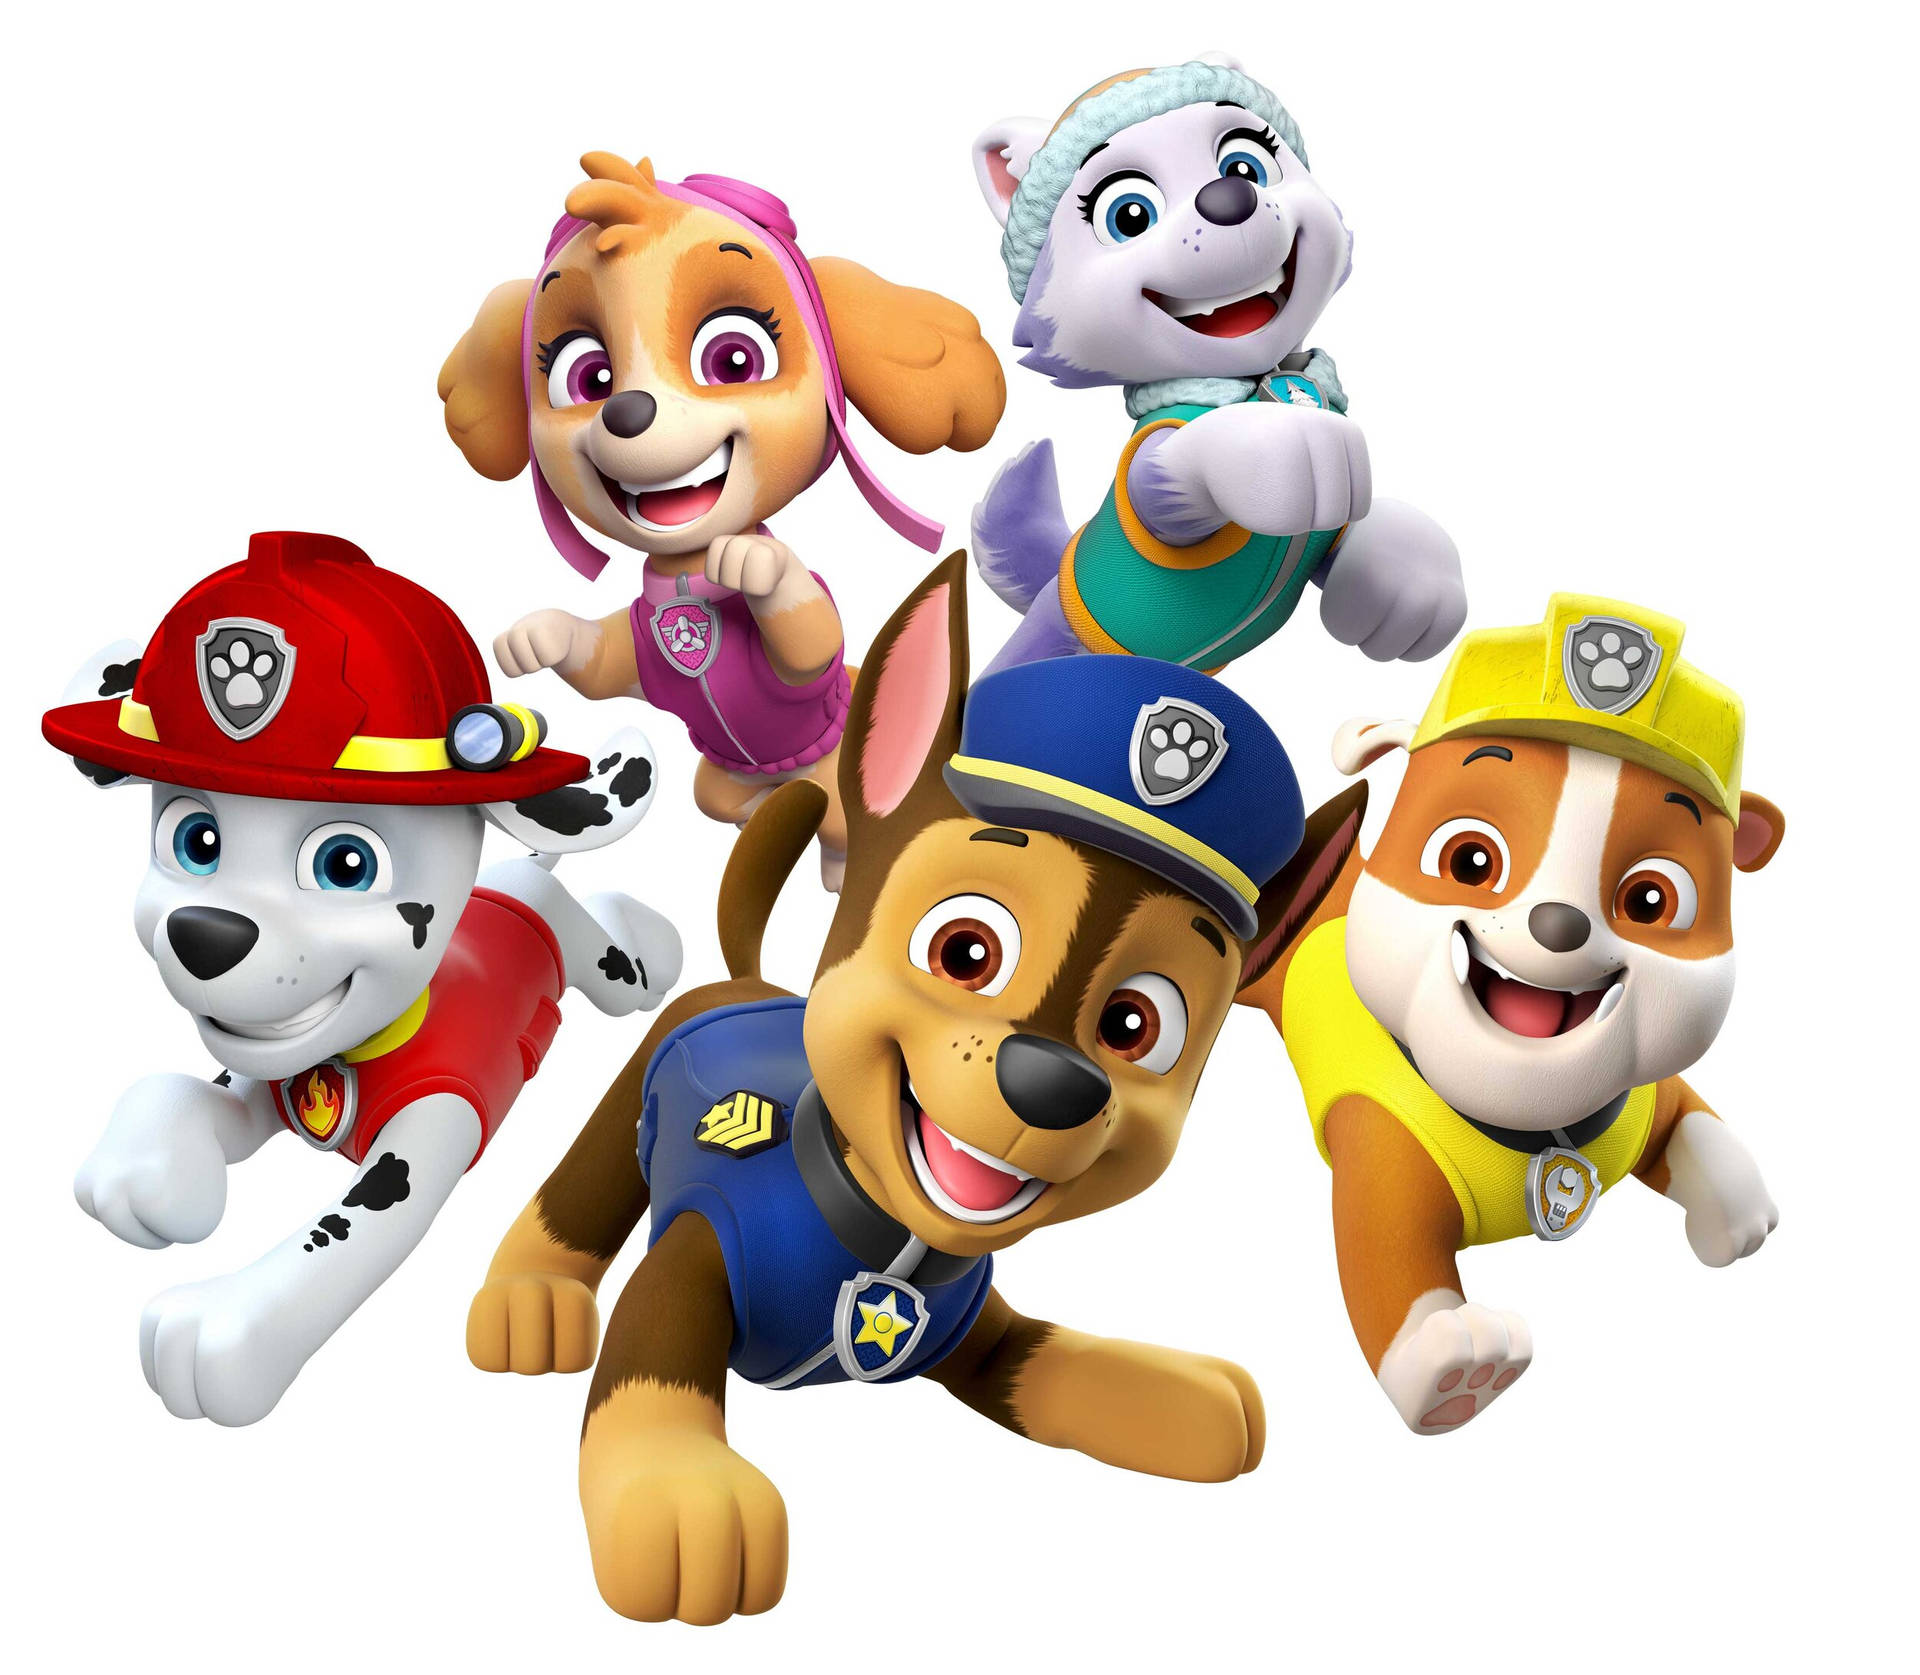 Paw Patrol Characters